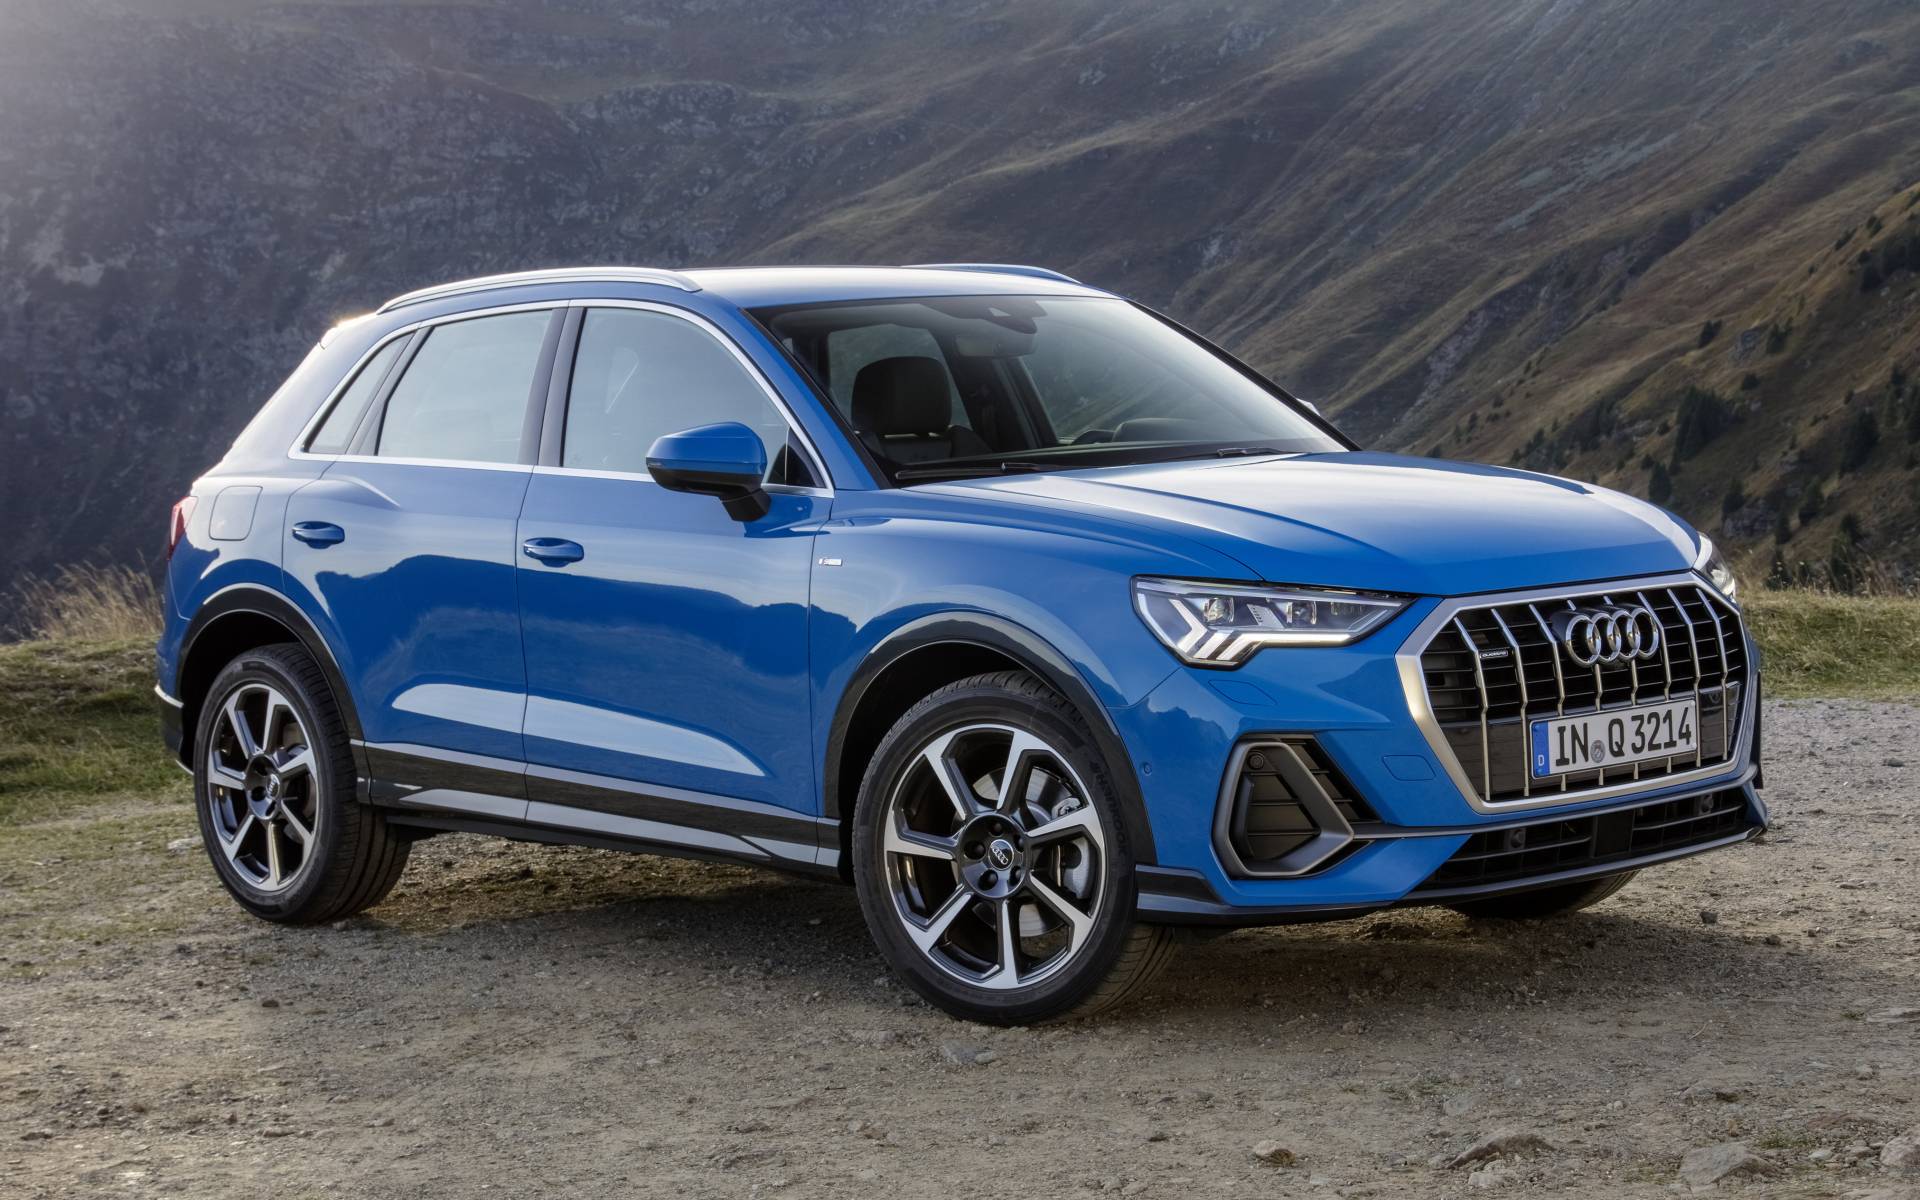 2020 Audi Q3 - News, reviews, picture galleries and videos - The Car Guide